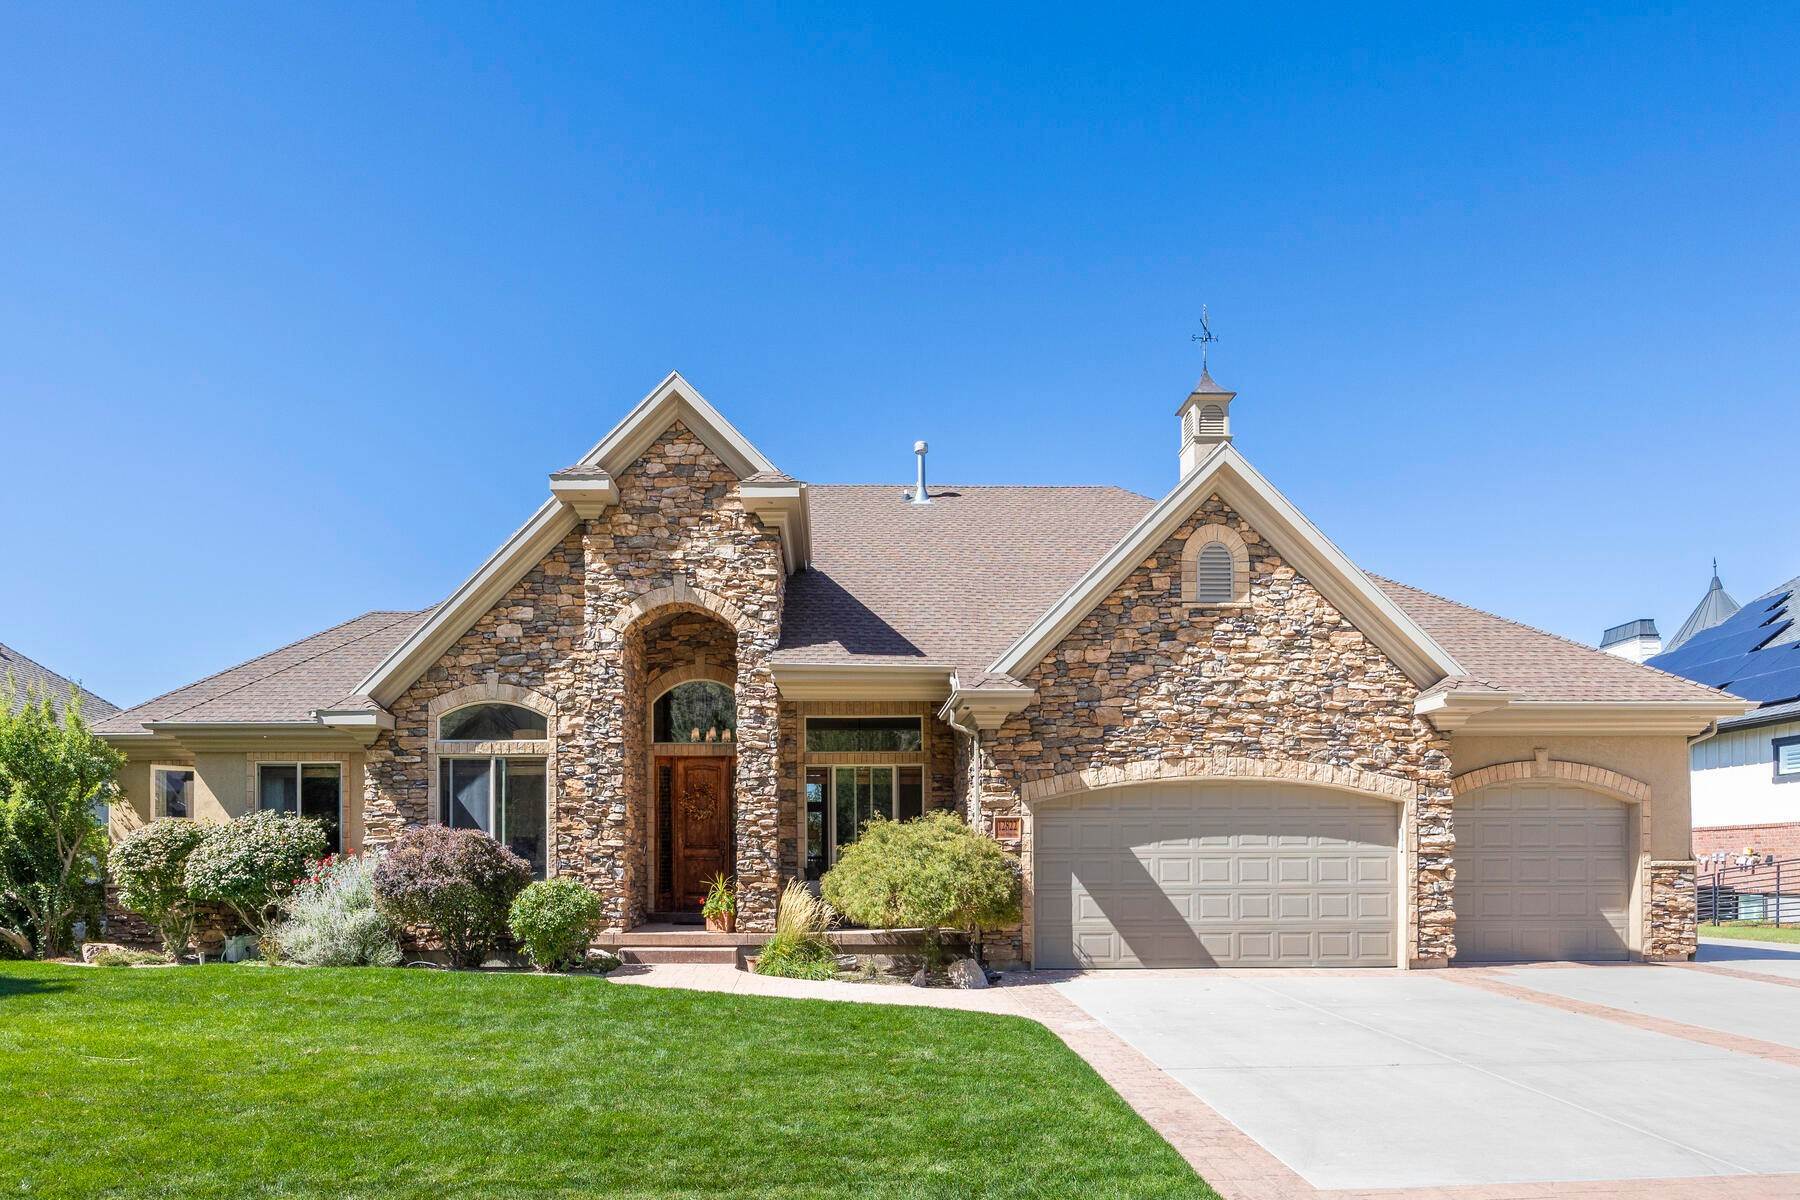 Single Family Homes for Sale at Perfect Blend of Luxurious Living and Natural Elements 12822 Hickory Ridge Lane Draper, Utah 84020 United States